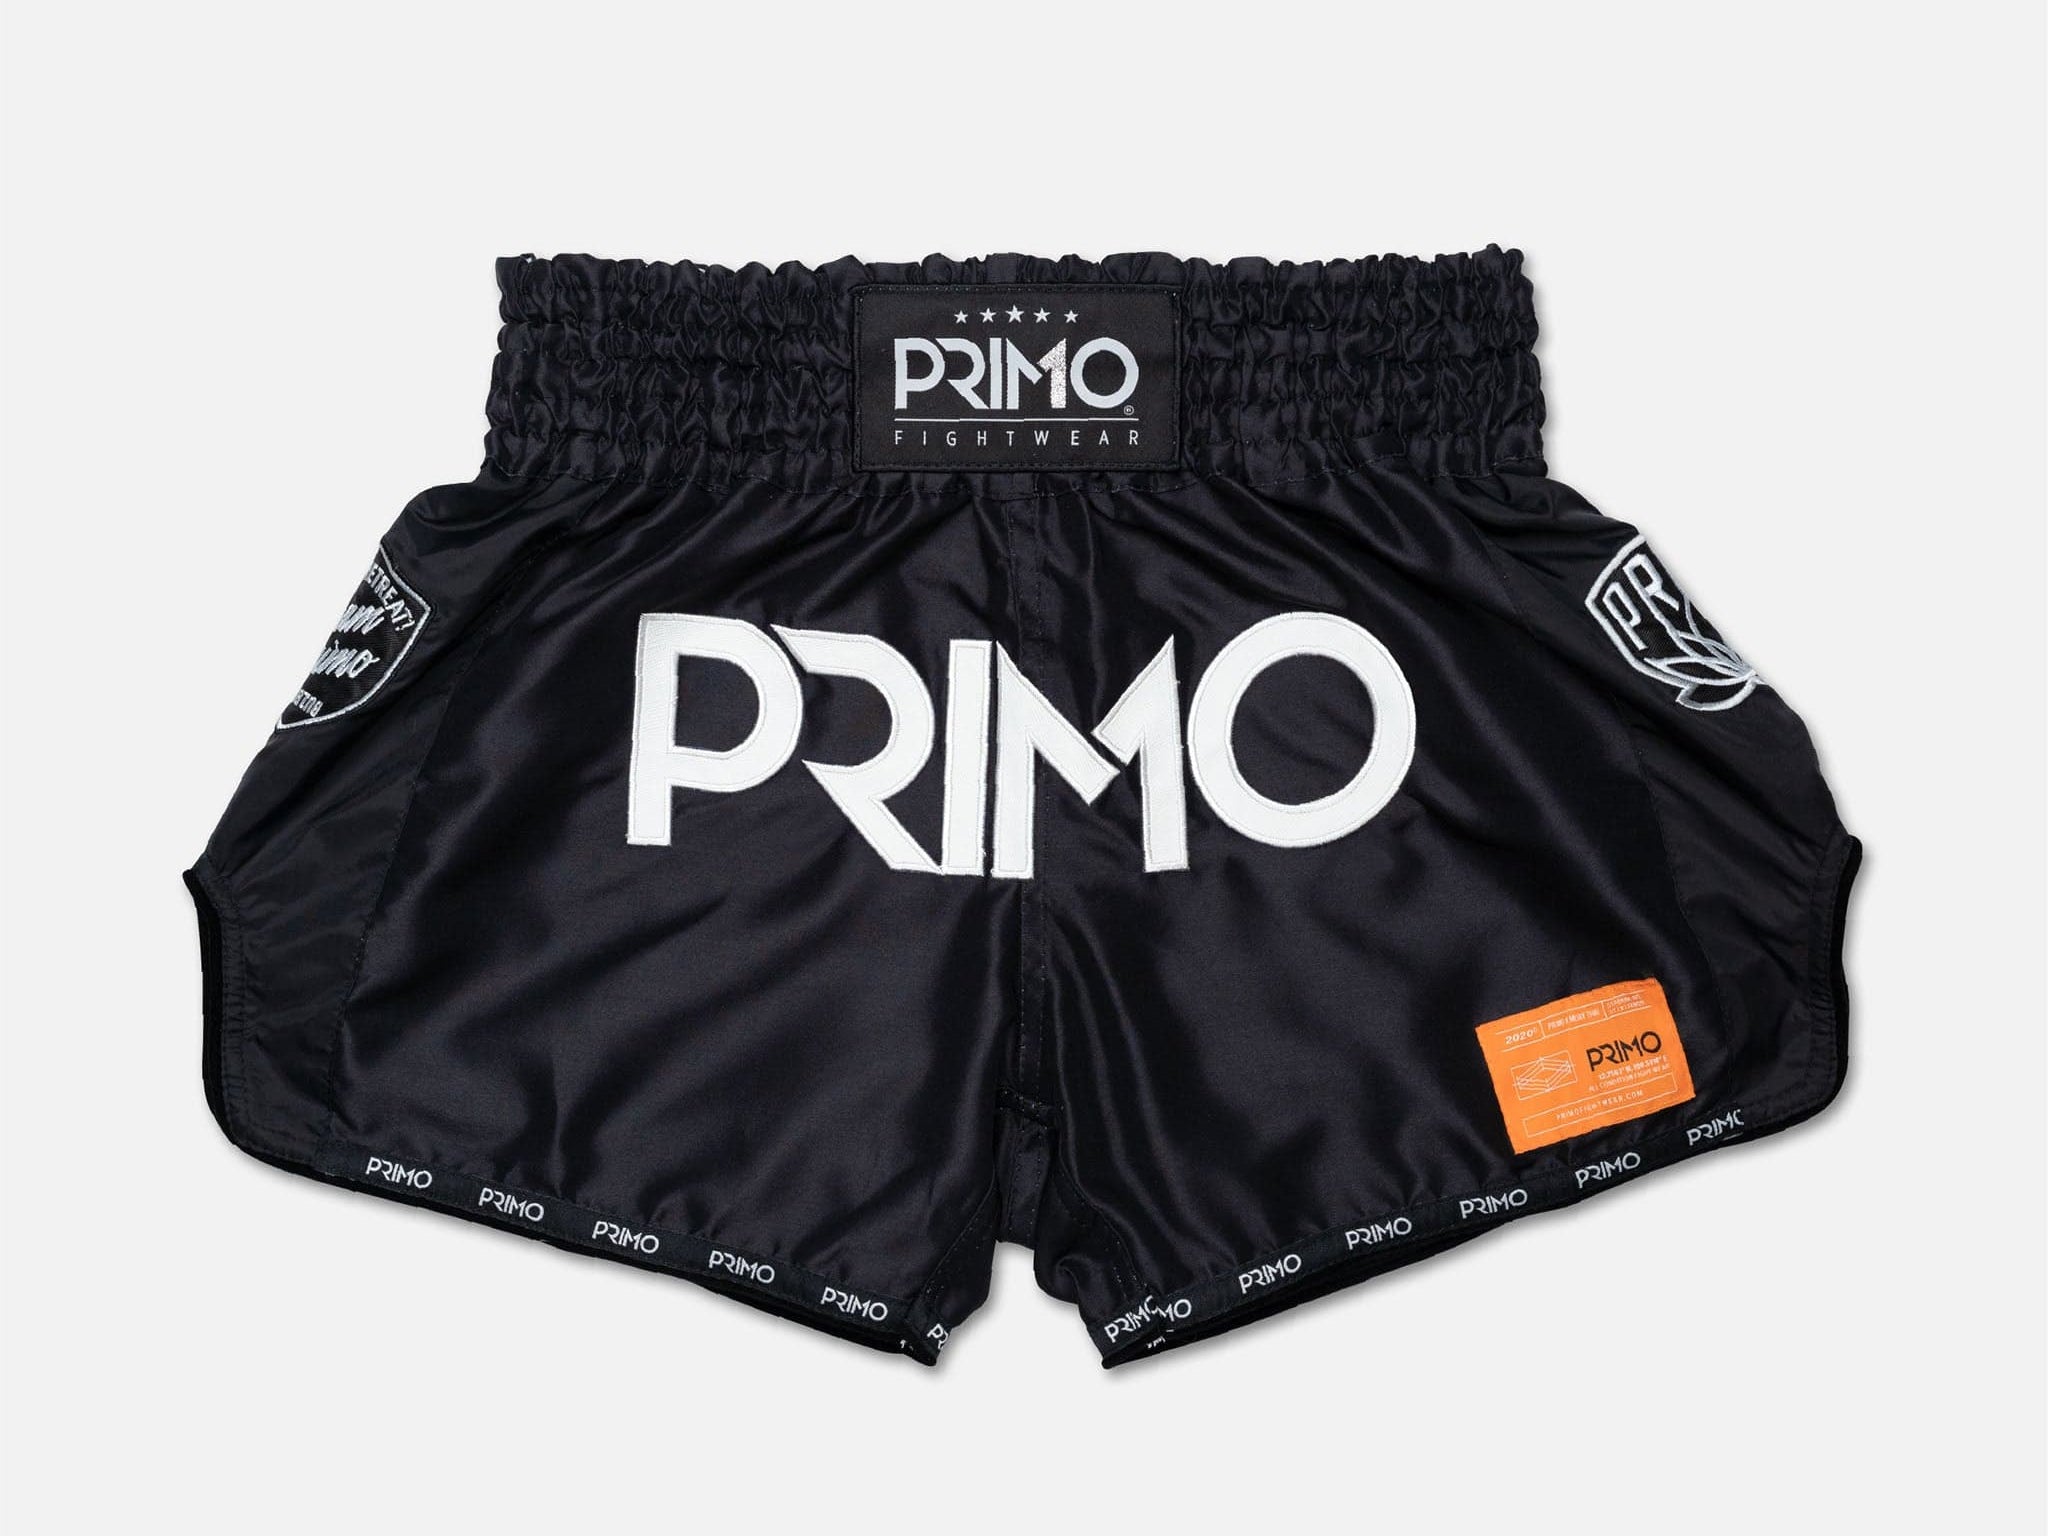 Primo Fight Wear Official Muay Thai Shorts - Free Flow Series - Gotham's Finest